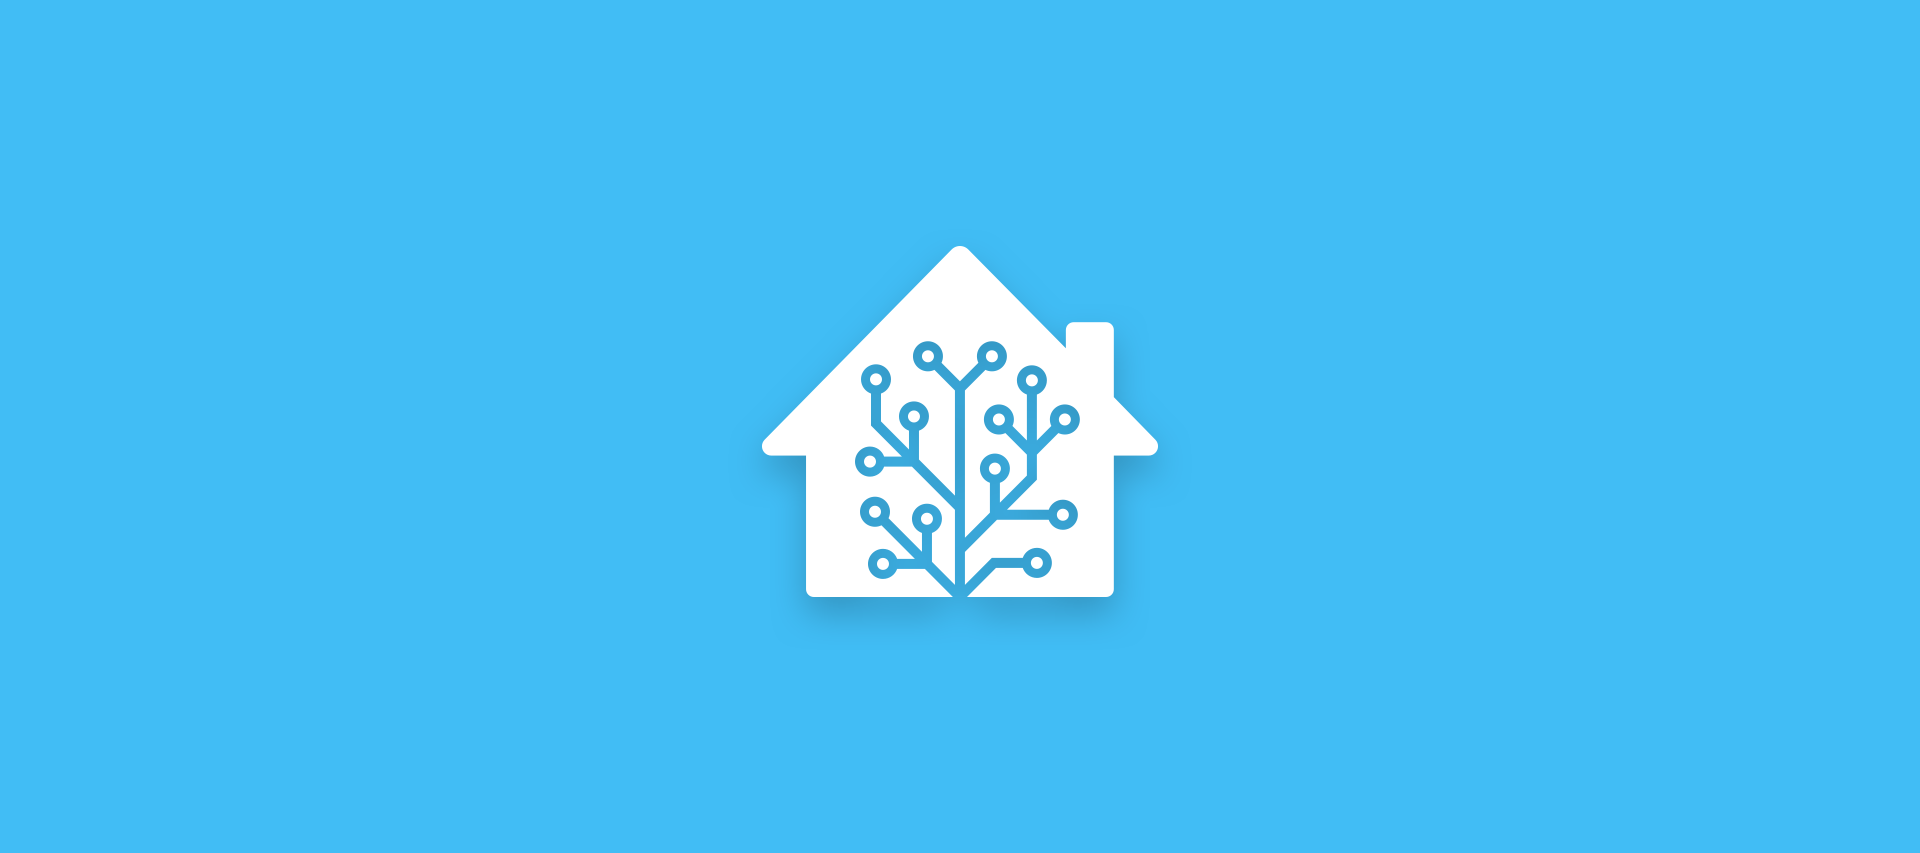 Setting up Home Assistant at your house